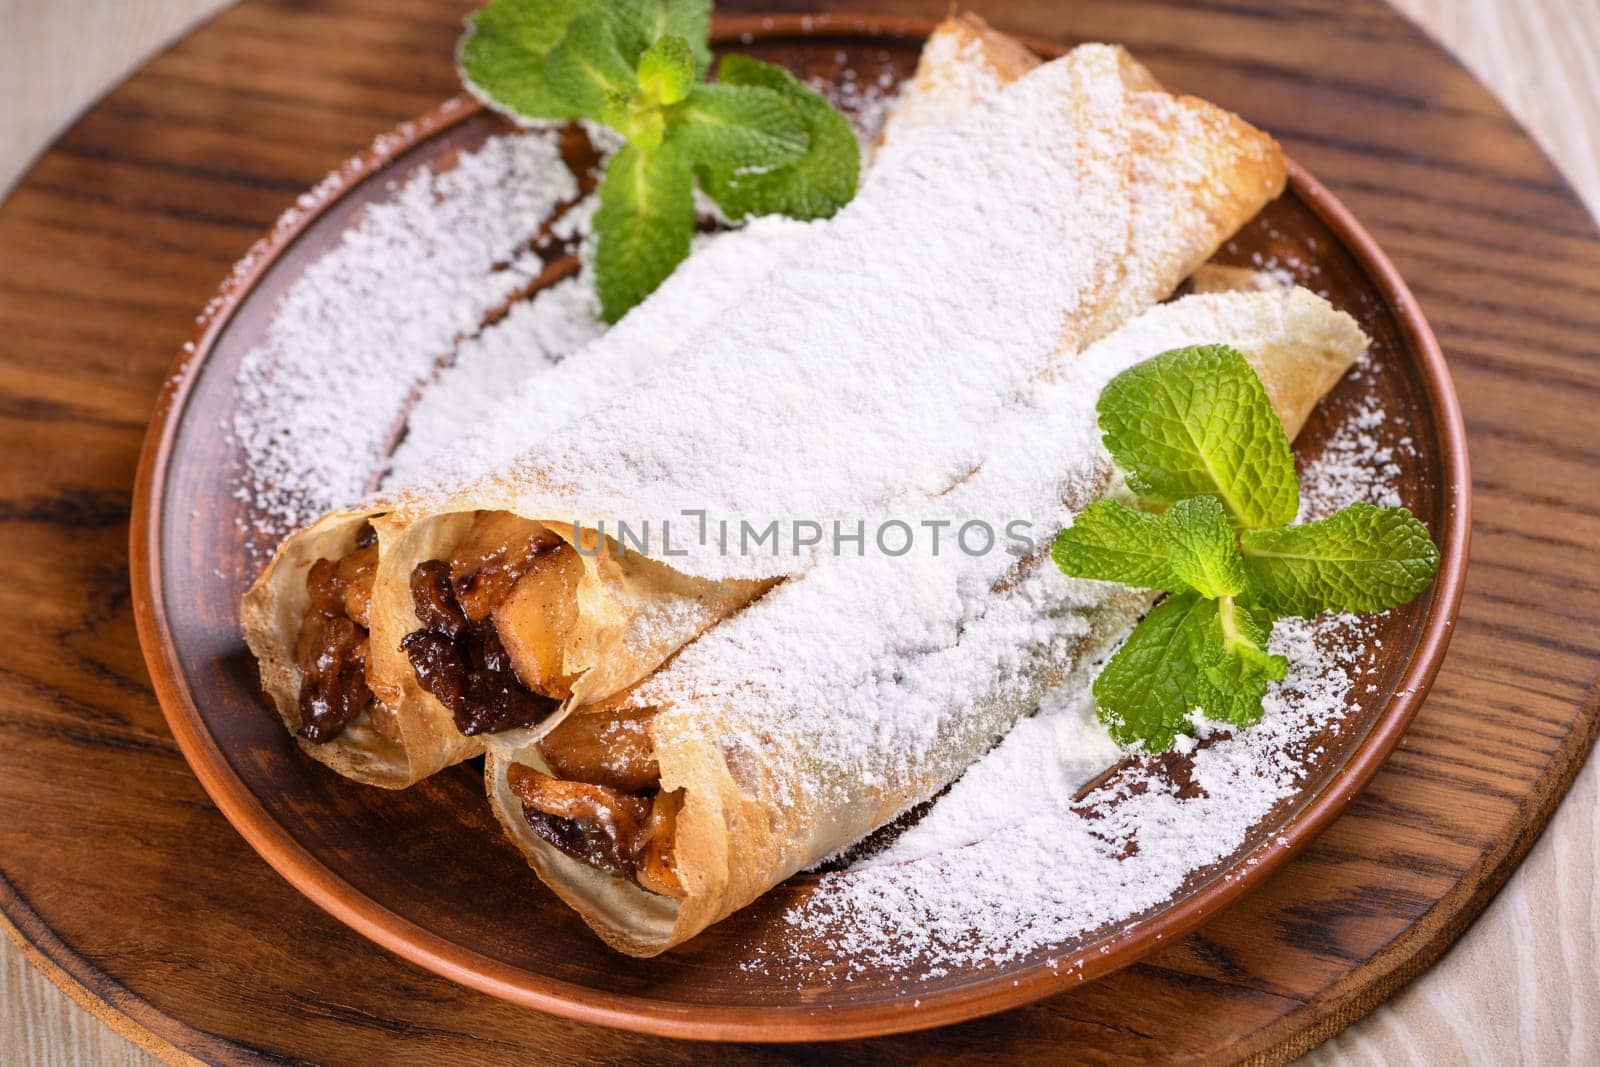 Homemade thin crepe (pancakes) with apple filling by Apolonia